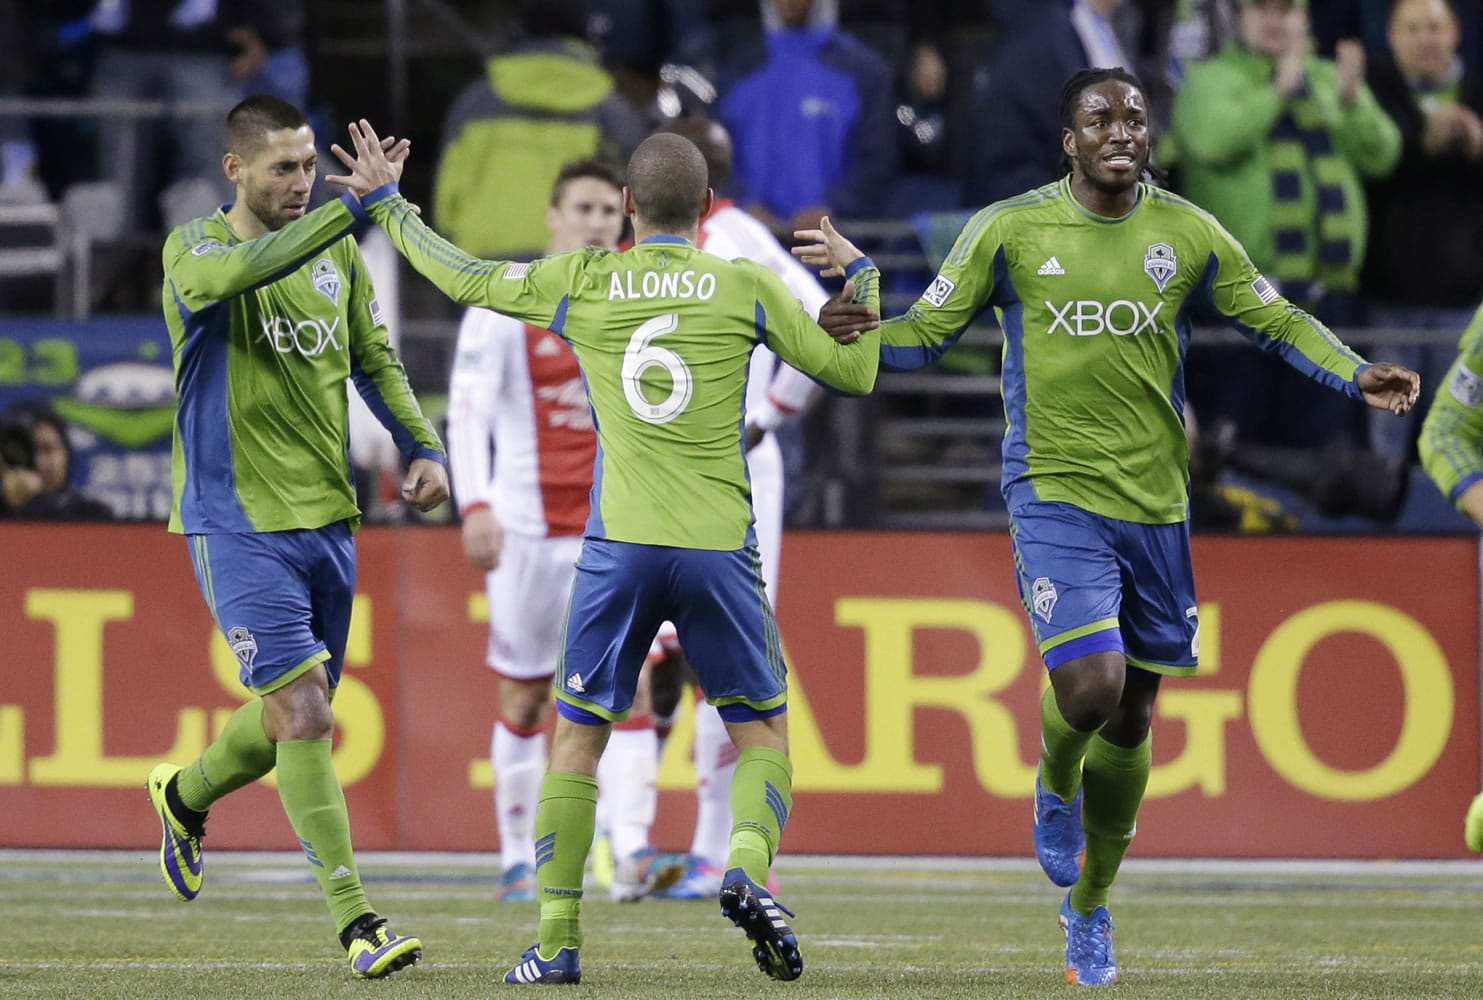 Seattle Sounders' Osvaldo Alonso (6) celebrates scoring with Clint Dempsey, left, and Shalrie Joseph against the Portland Timbers in the second half of the first game of the Western Conference semifinals in the MLS Cup soccer playoffs on Saturday, Nov. 2, 2013, in Seattle. The Timbers won 2-1 in the first of the two-game aggregate playoff series.